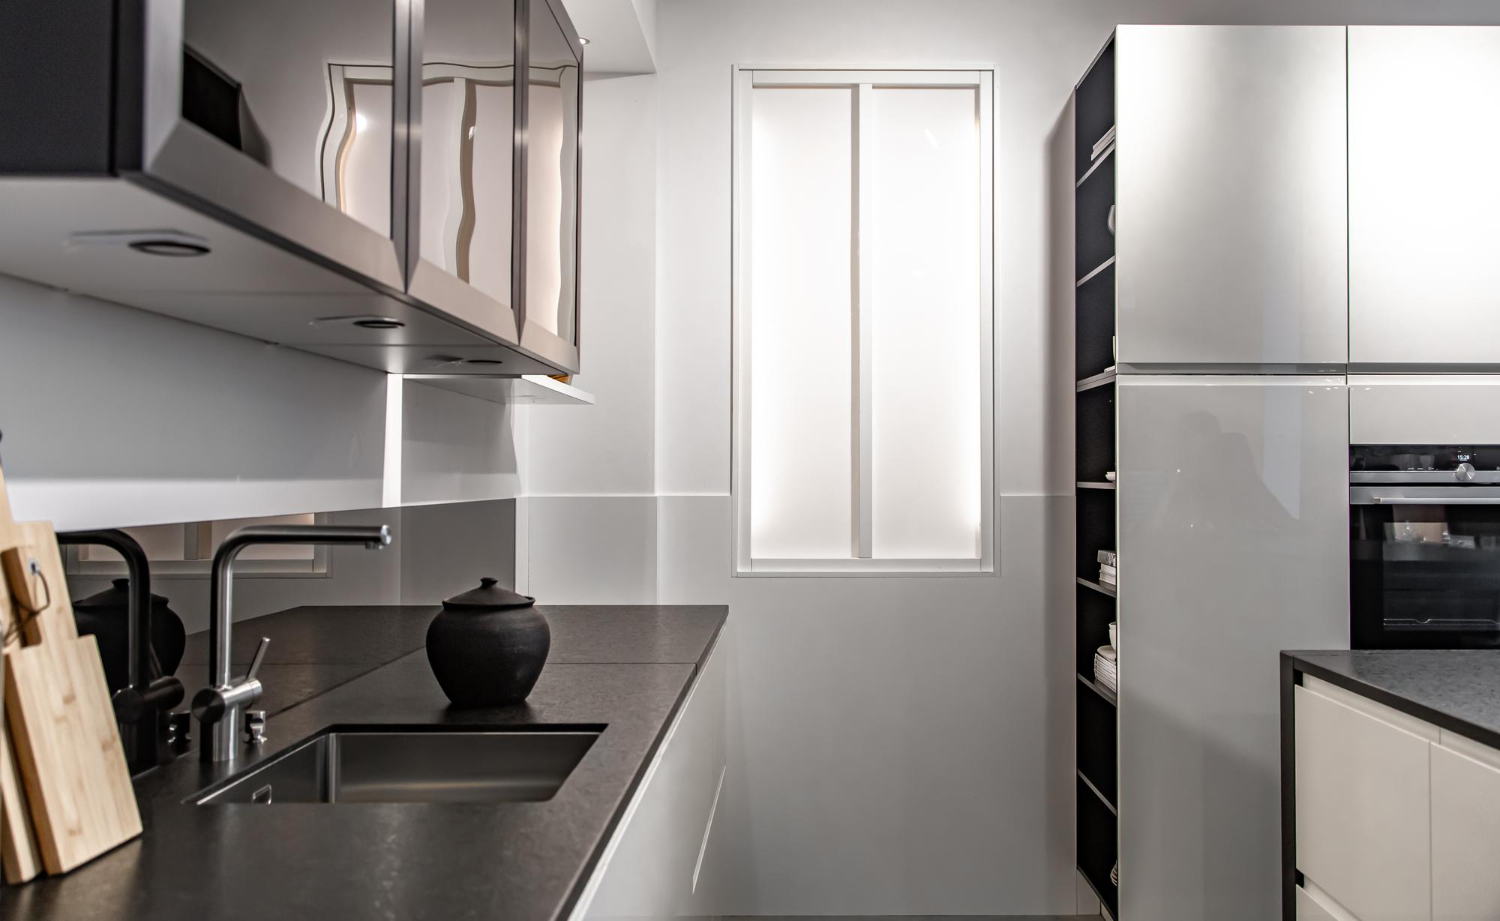 Cost of metal cabinets is notably higher than traditional cabinets as the cabinet body is often made of fully new materials, instead of MDF, which is more affordable for conventional cabinets.